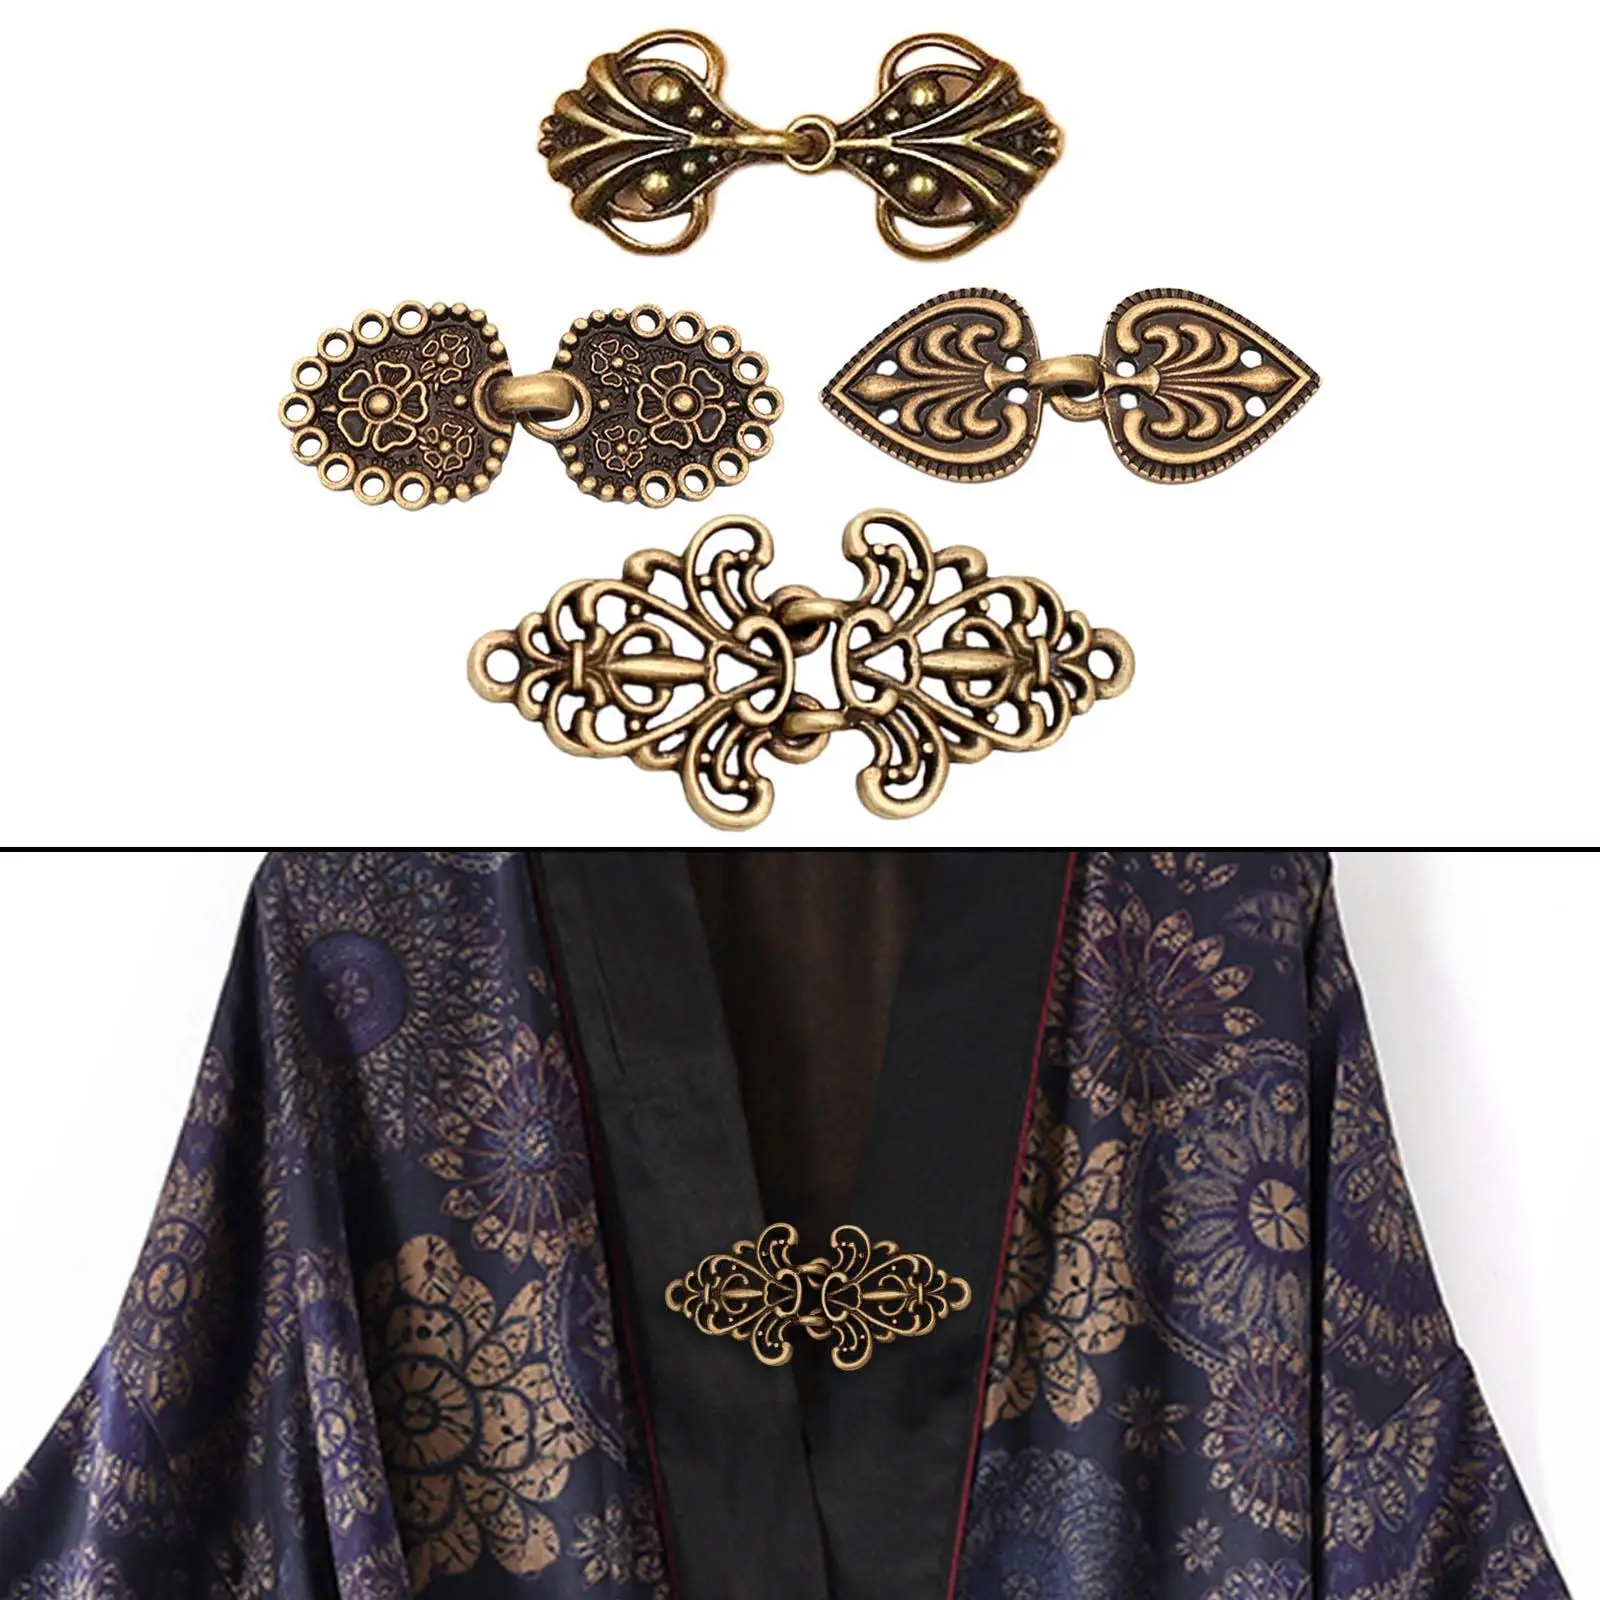 4 Pairs Women Clasp Fasteners Cardigan Clip Decorative Swirl Flower Cape or Cloak Clasp Fasteners Sew on Hooks and Eyes